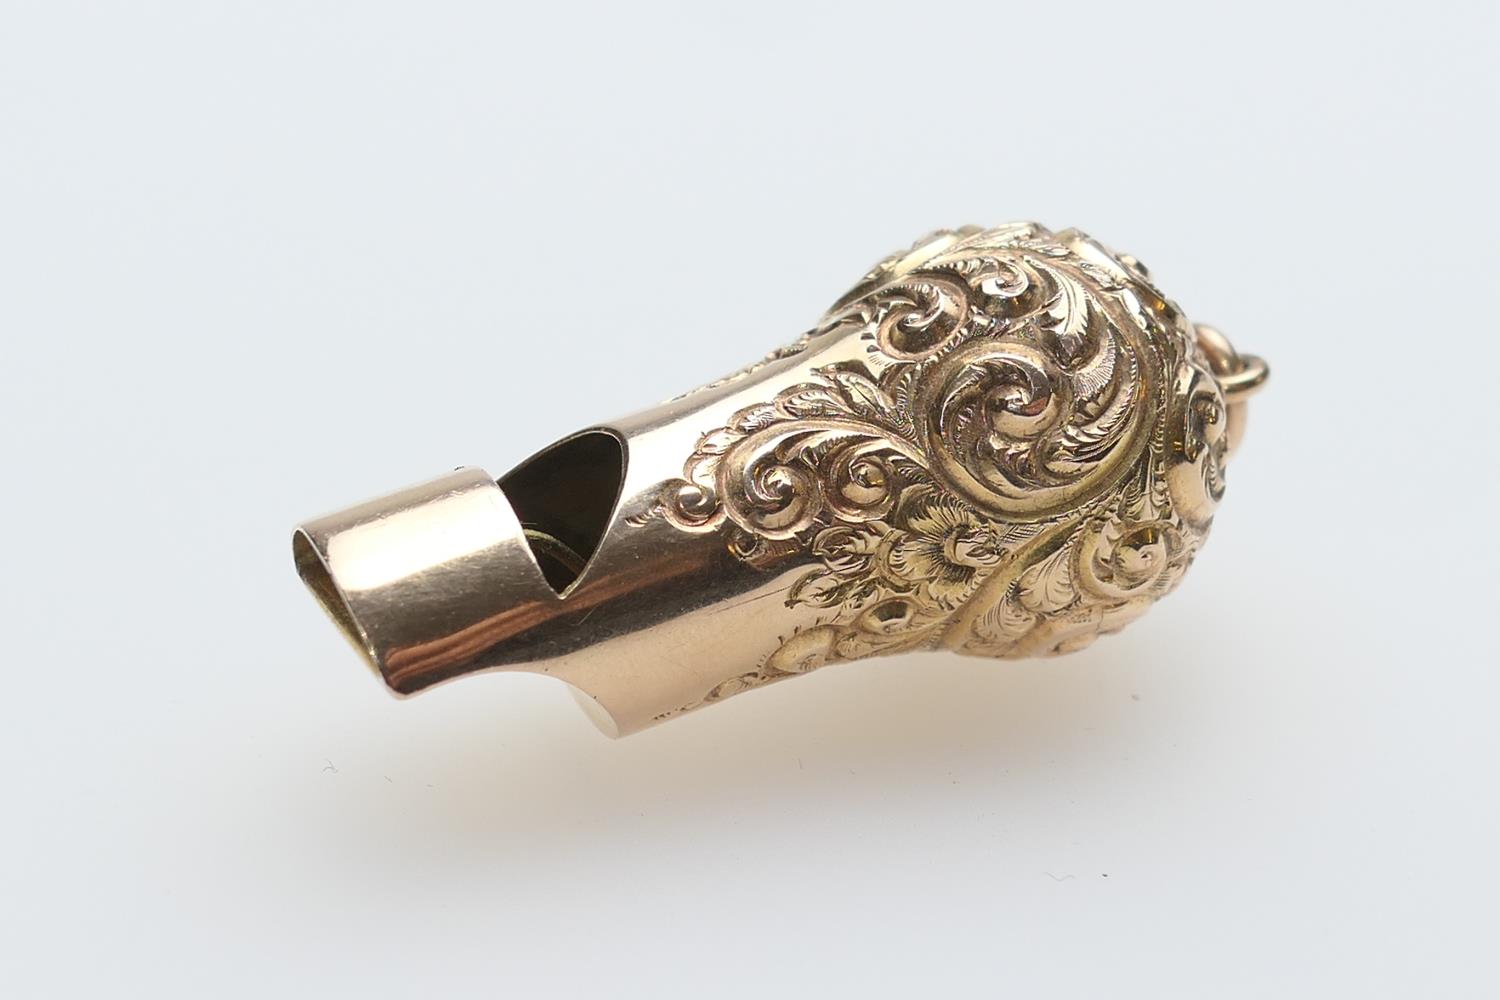 Rare Tiffany & Co. 14ct gold whistle, chased with foliate scrolls, with ring for suspension, - Image 3 of 4